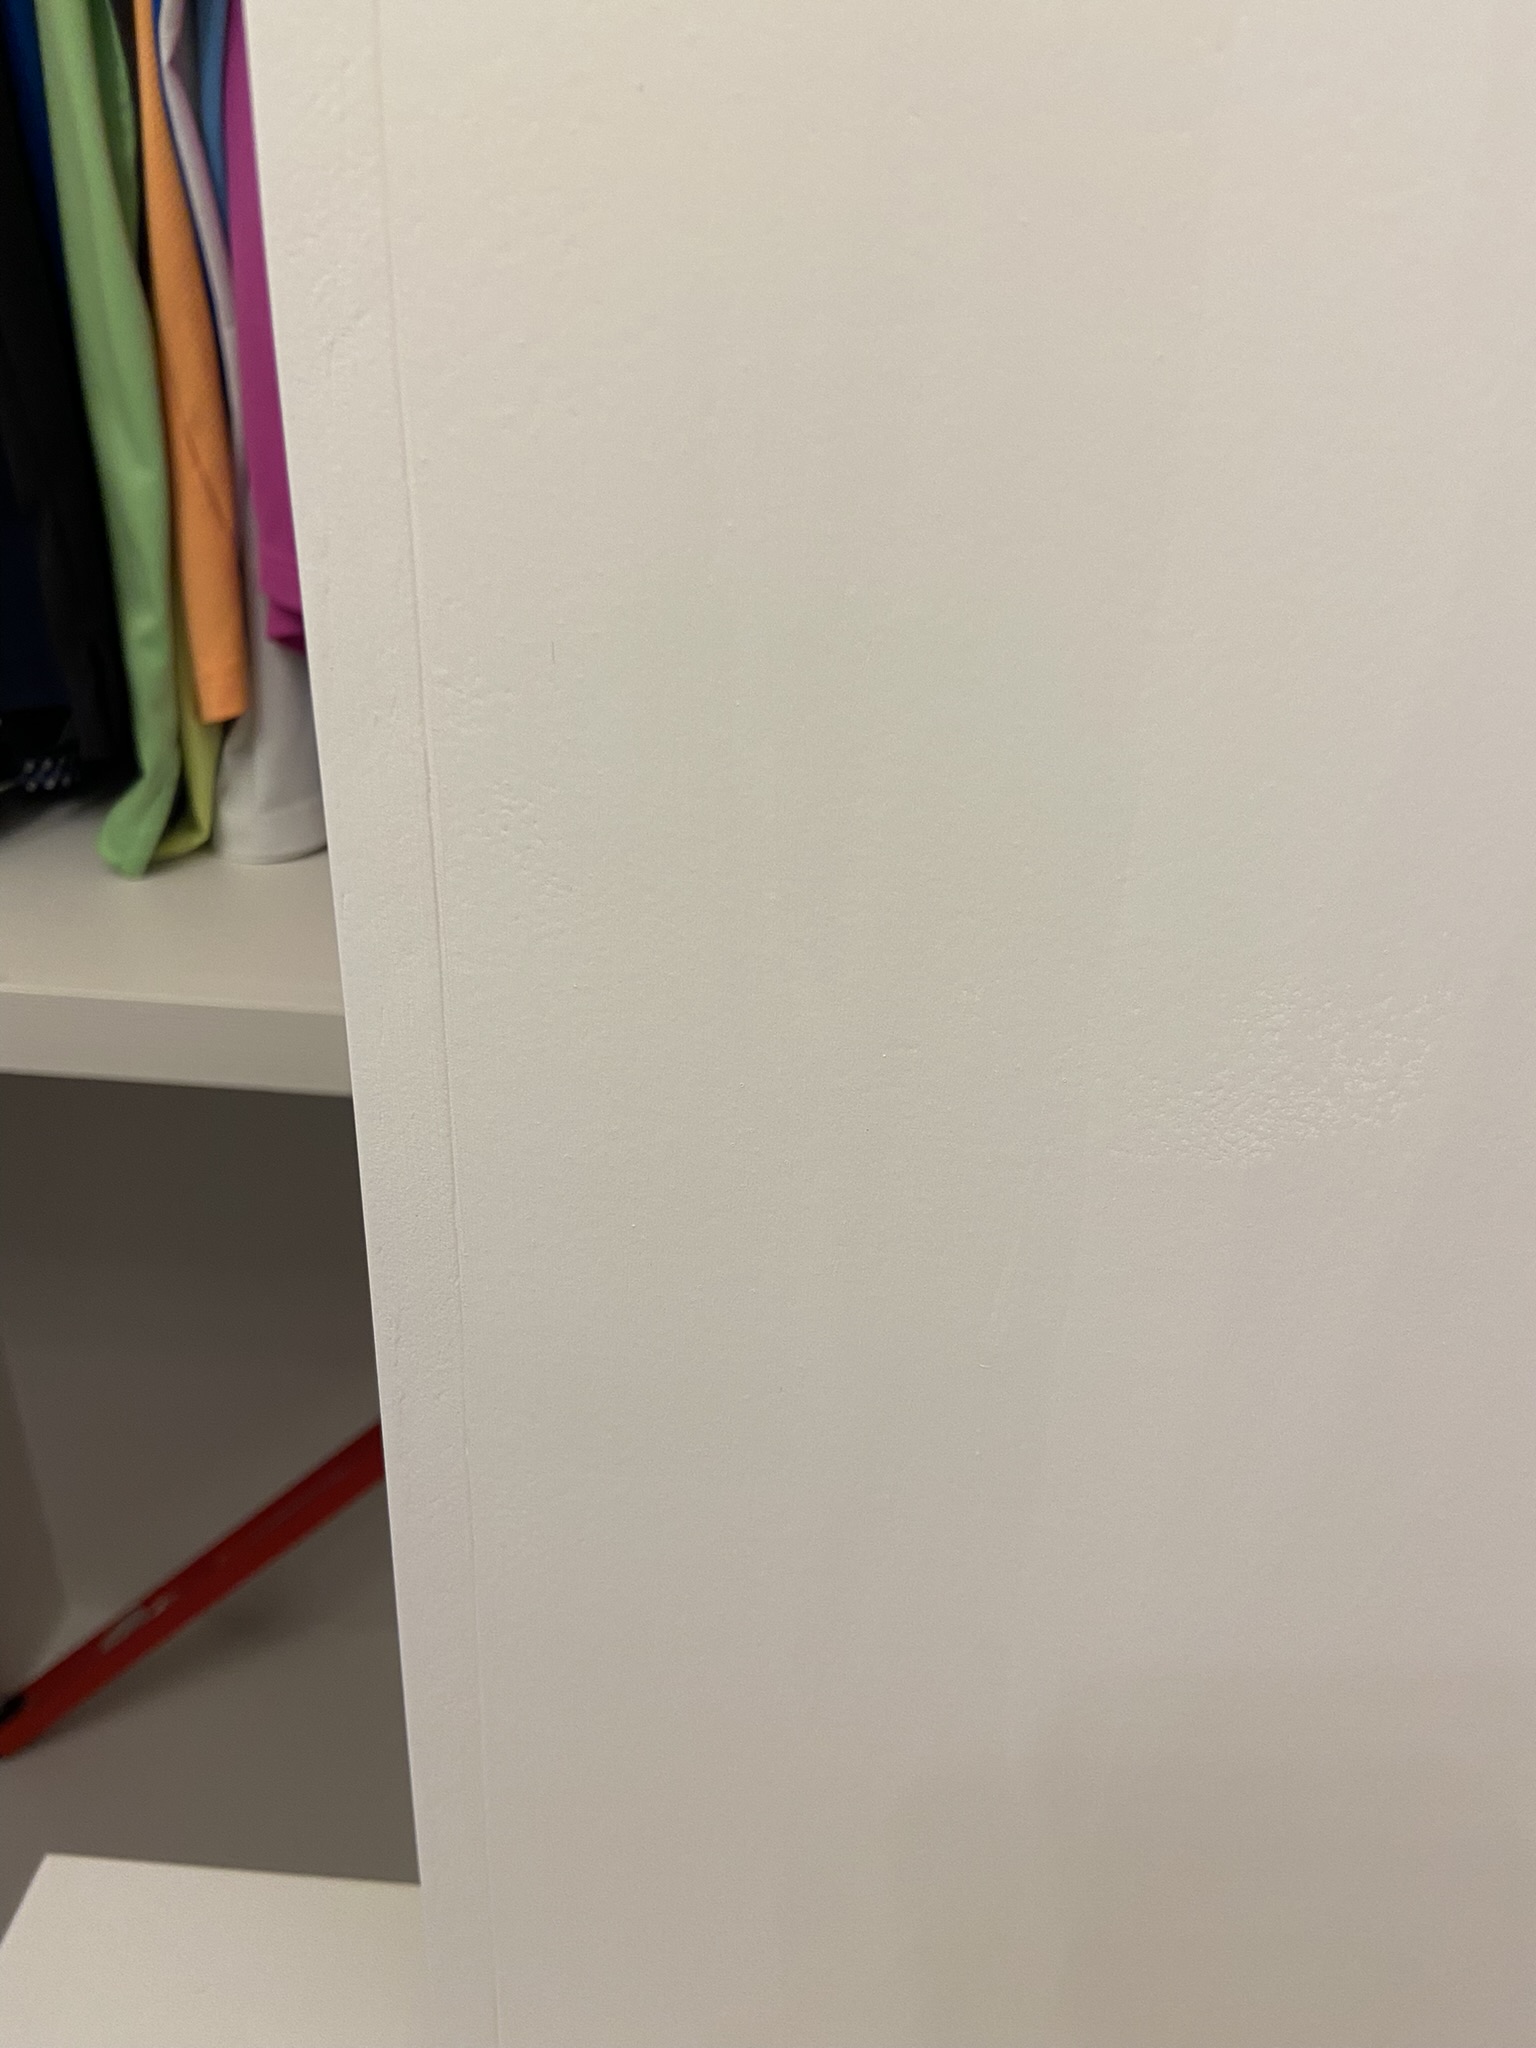 DIY Custom closet makeover, filling wood seams with spackle.